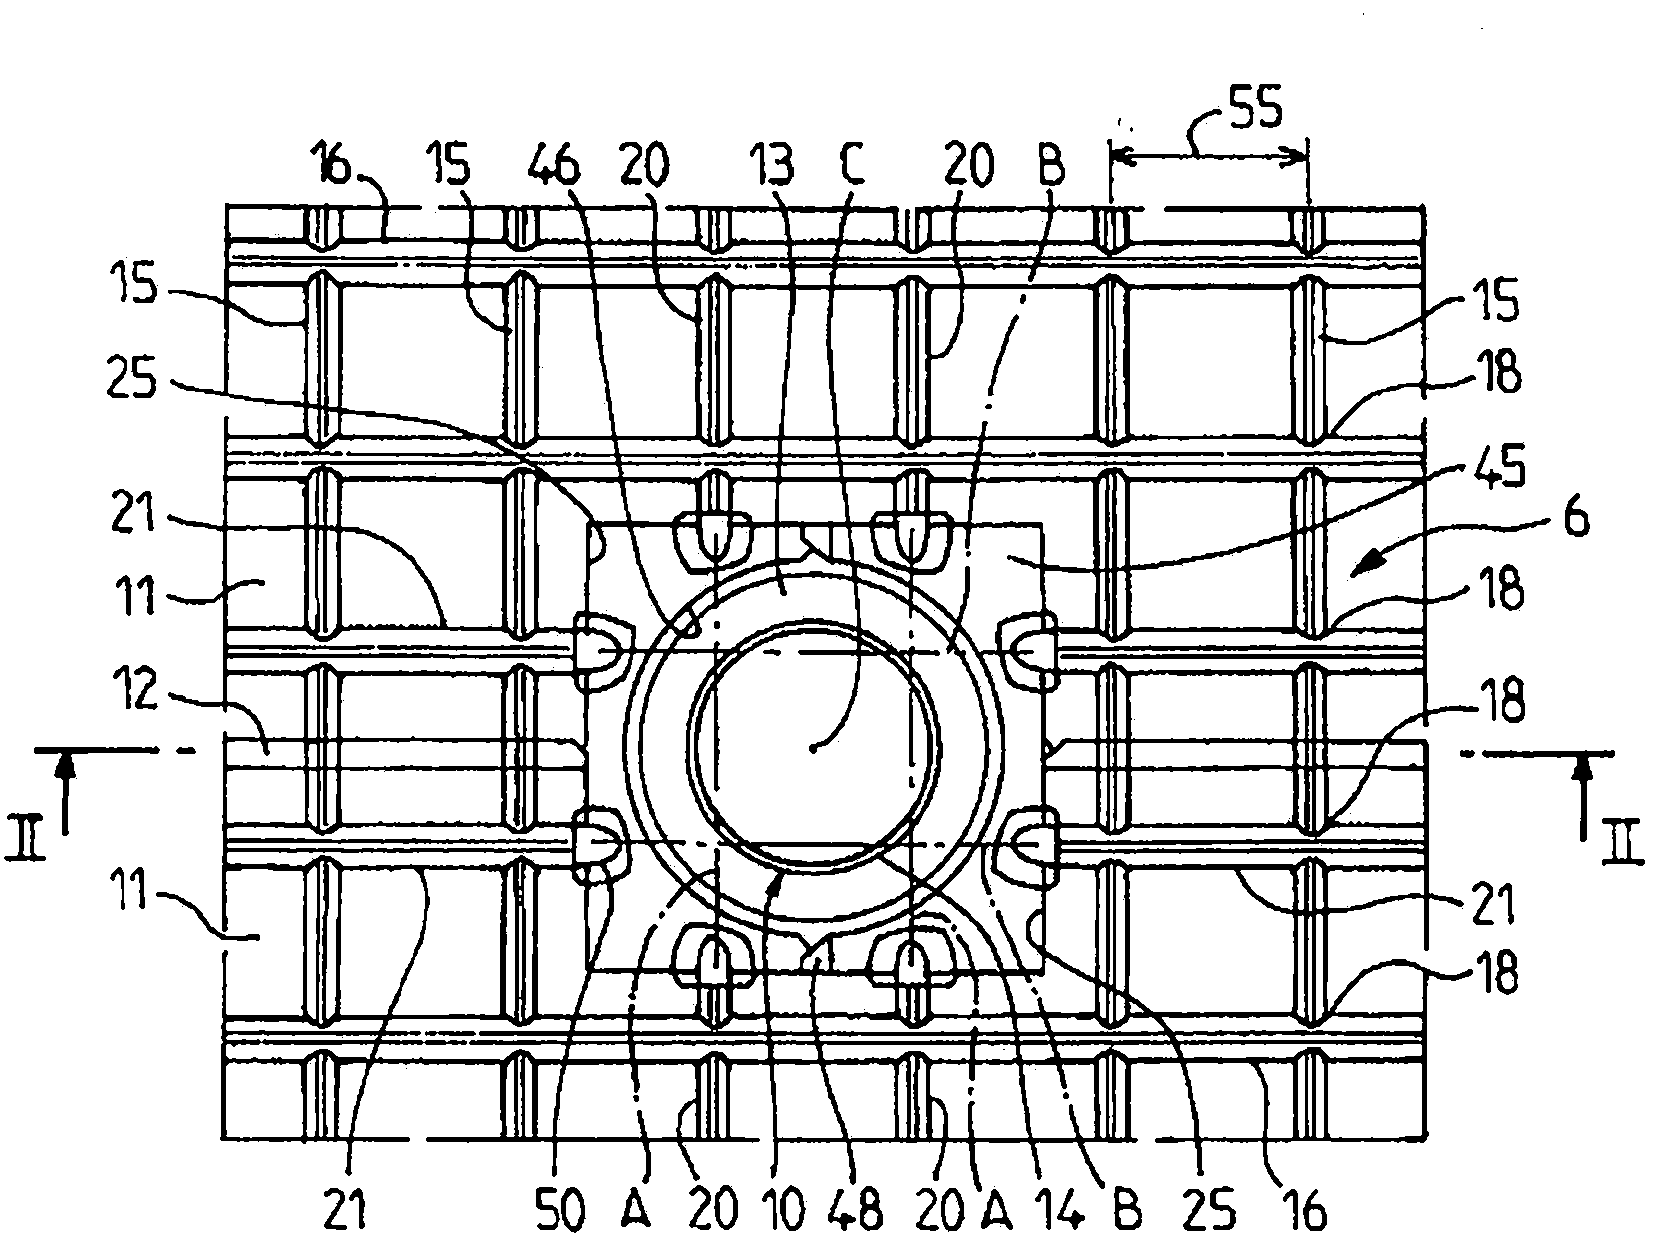 Sealed and insulating vessel comprising a support foot